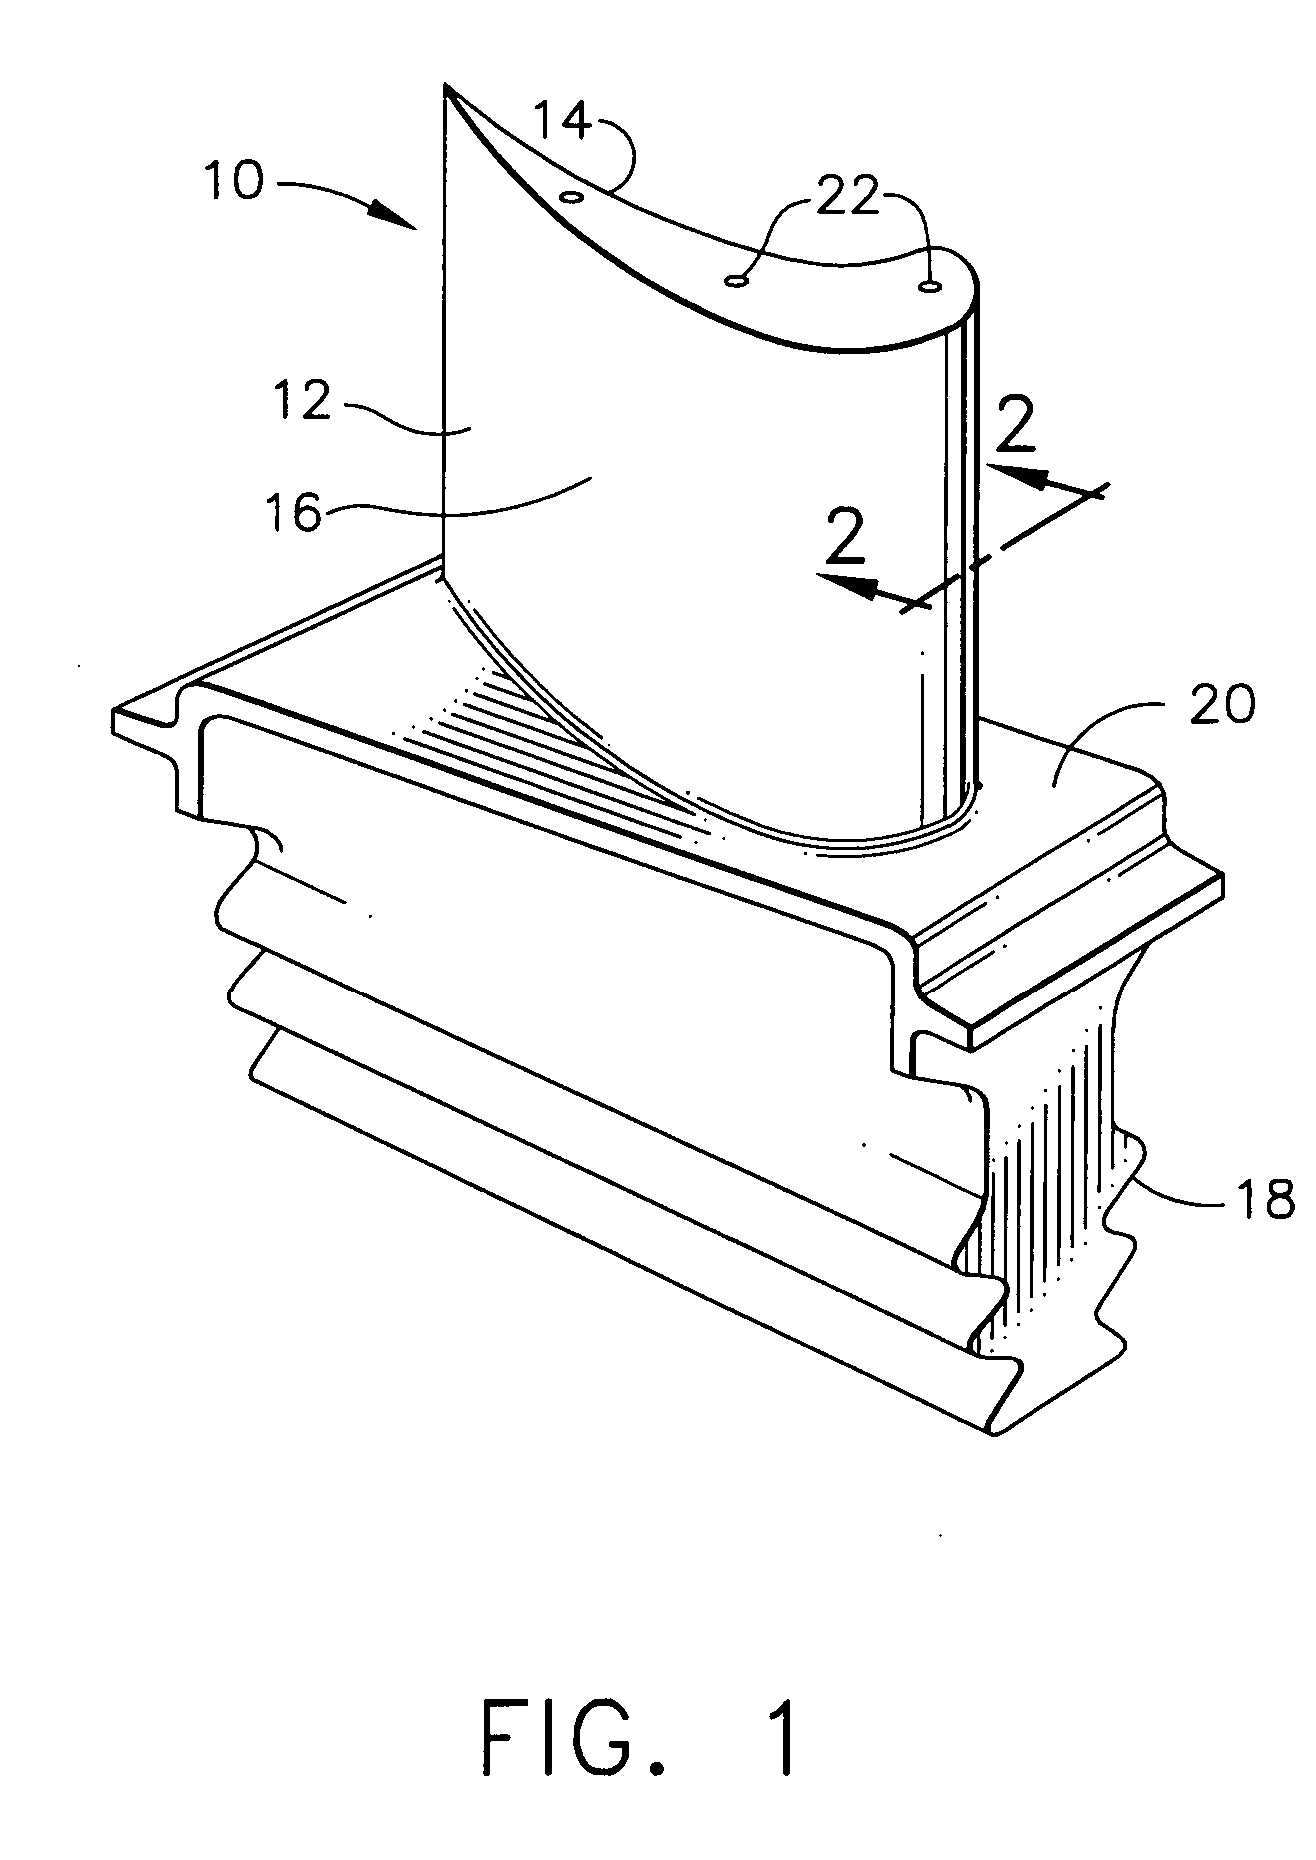 Bond coat for corrosion resistant EBC for silicon-containing substrate and processes for preparing same